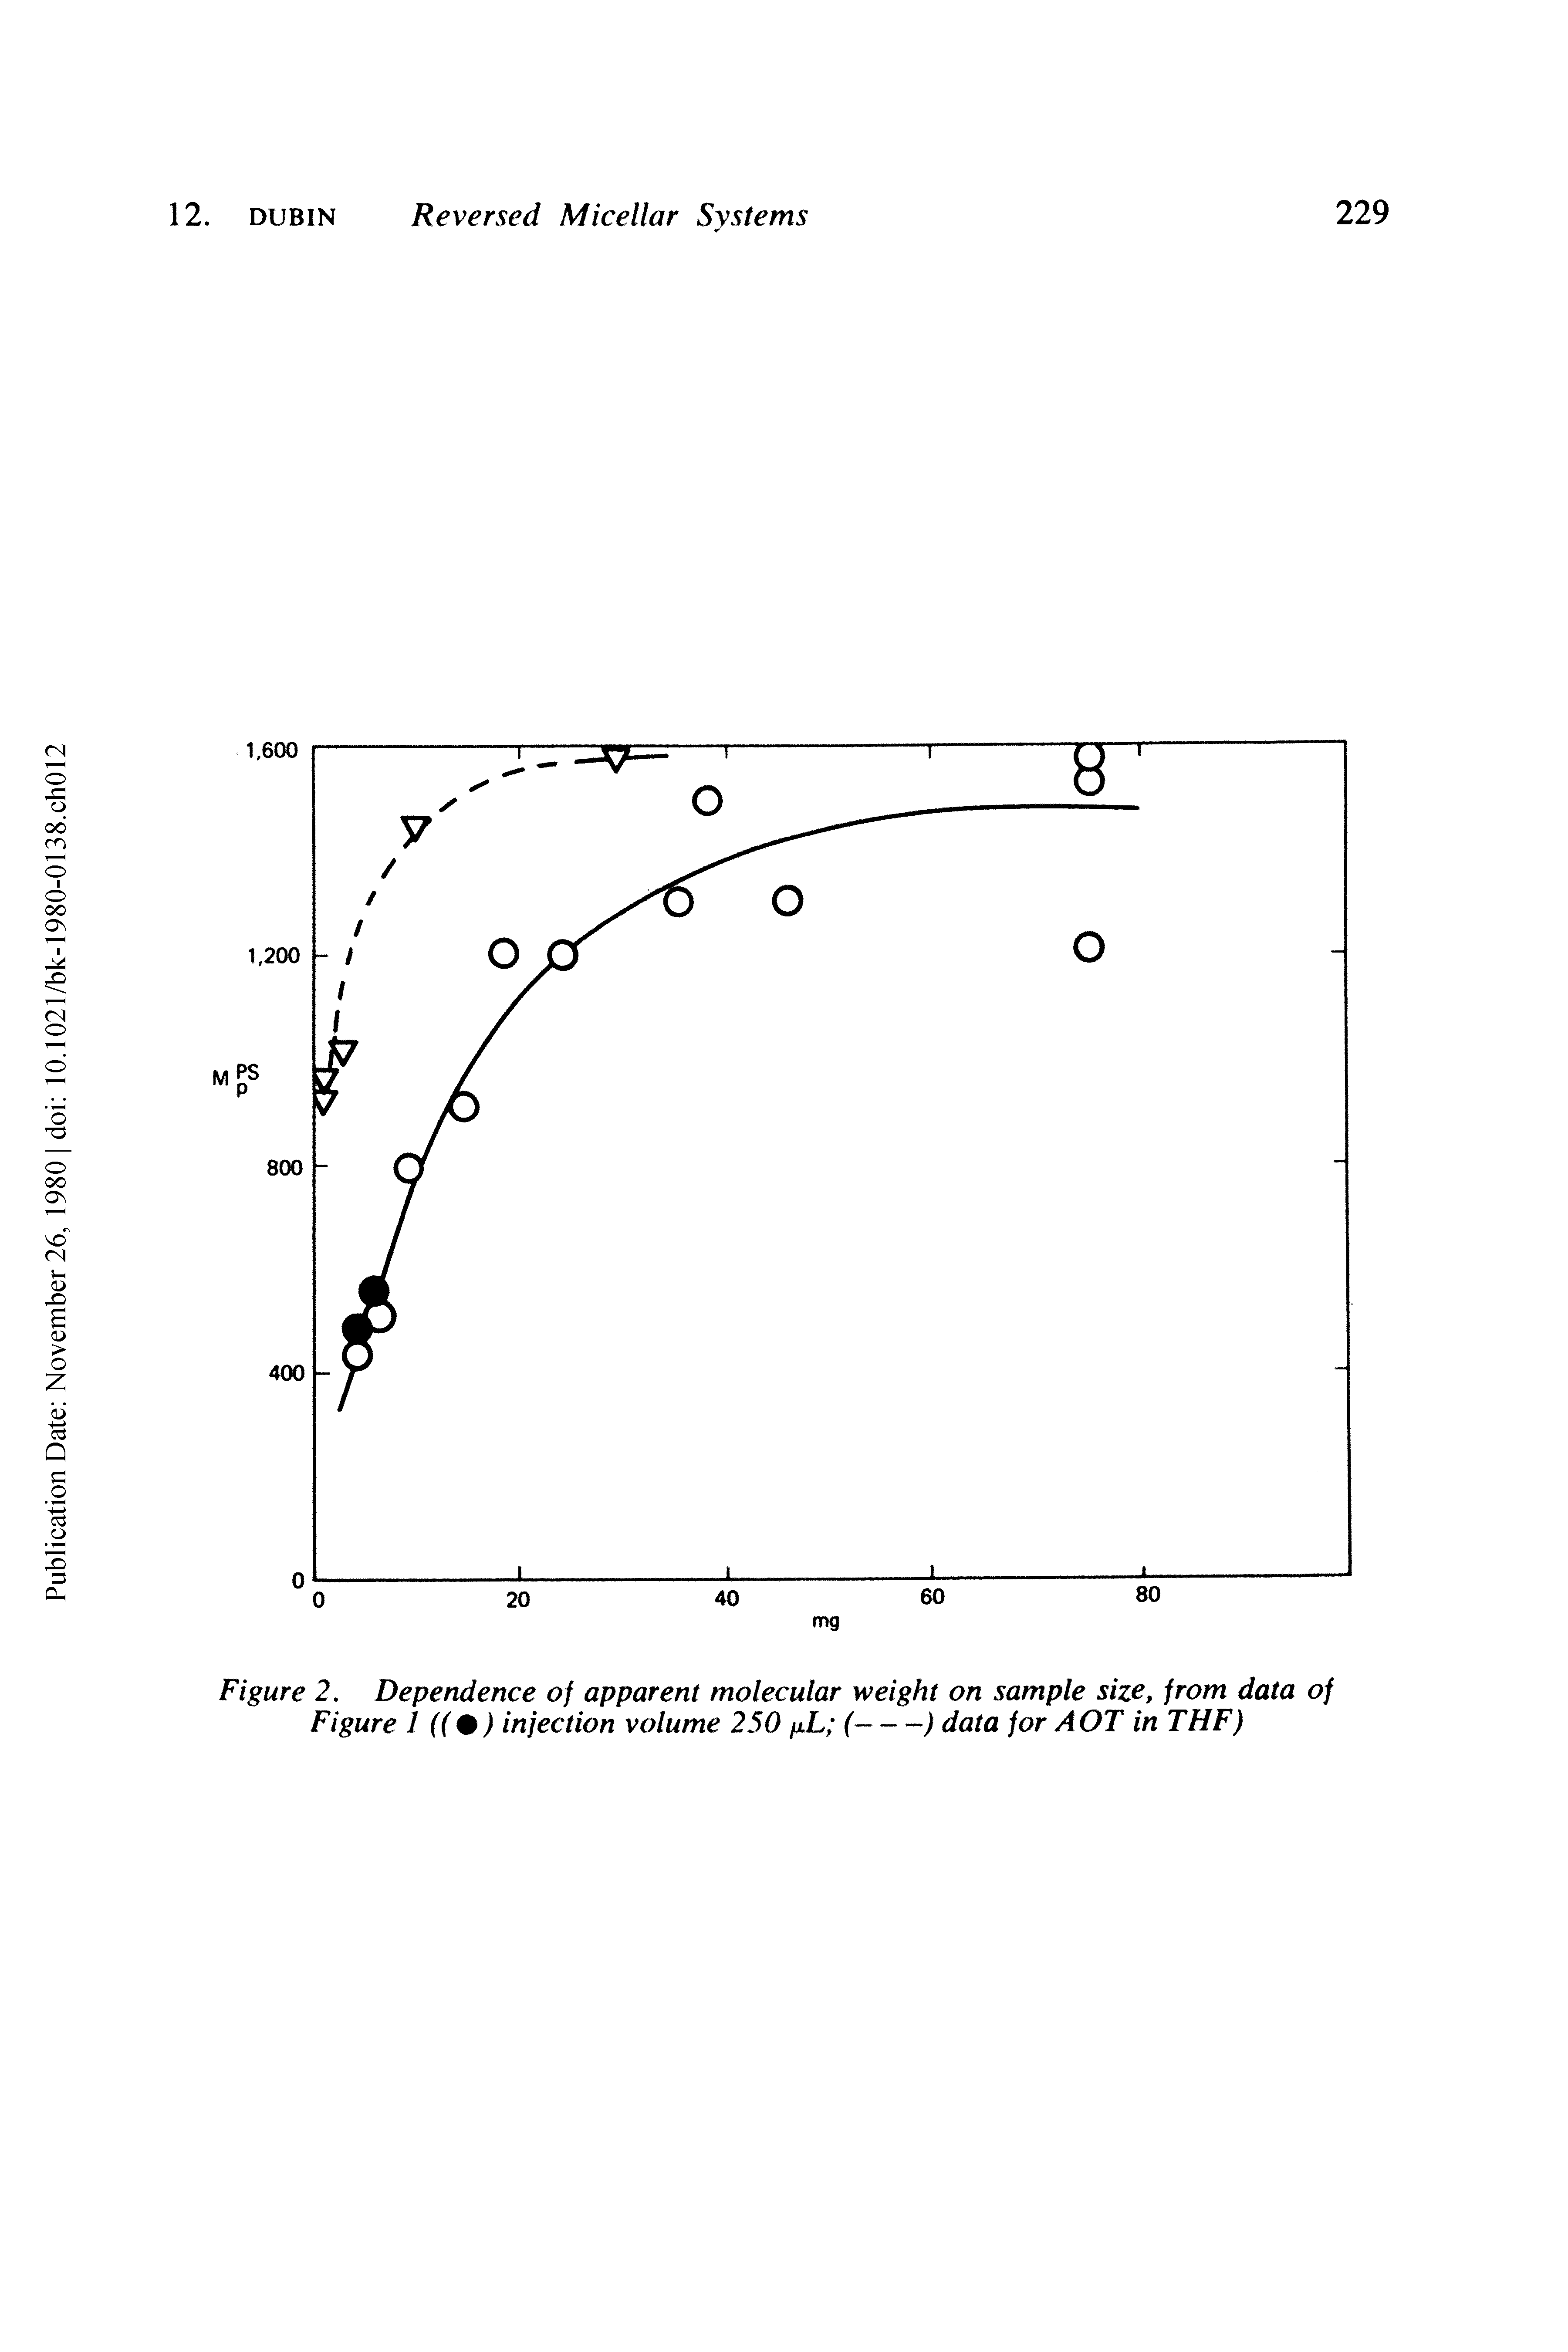 Figure 2. Dependence of apparent molecular weight on sample size, from data of Figure 1 ((%) injection volume 250 fxL (--) data for AOT in THF)...